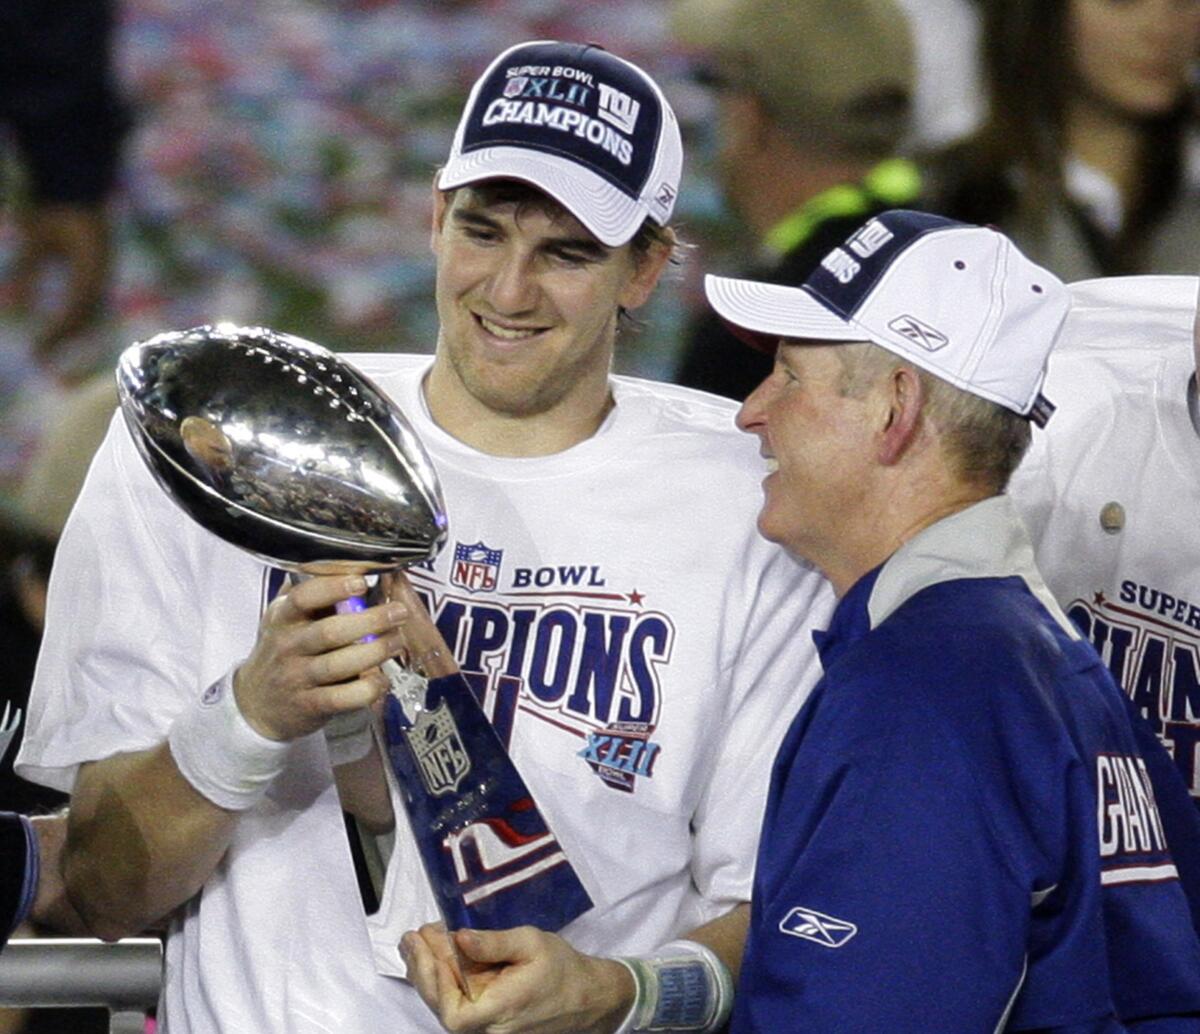 Giants quarterback Eli Manning and coach Tom Coughlin inspect the Vince Lombardi Trophy after winning Super Bowl XLII. 